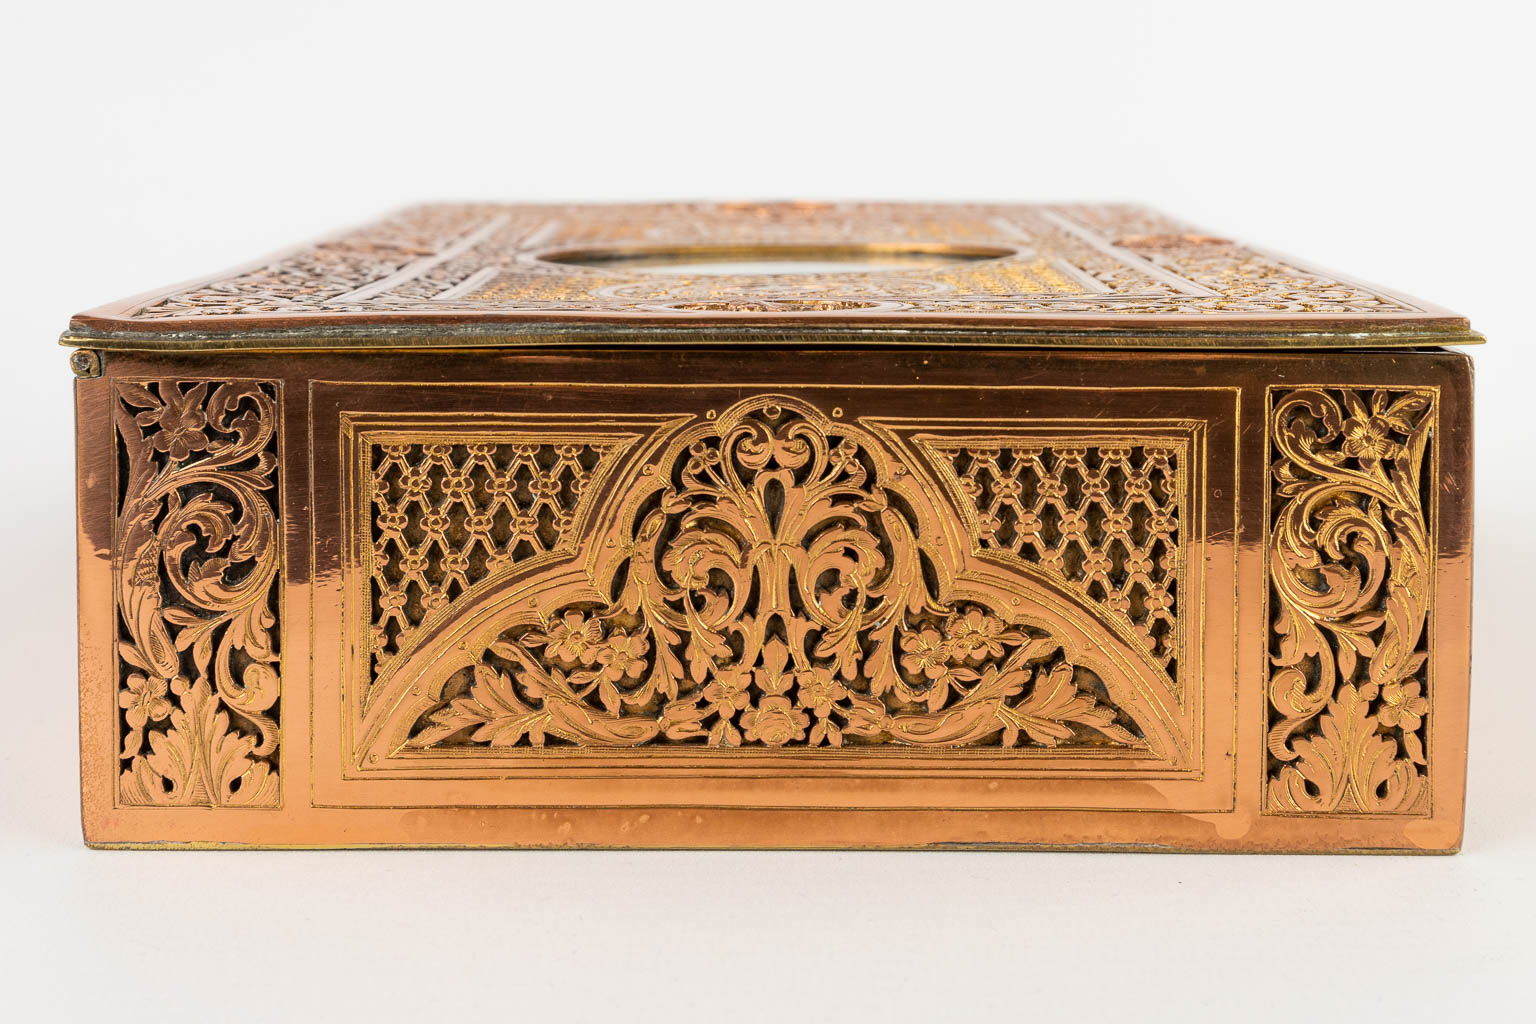 A jewellery box, ajoured brass and finished with a miniature painting. (D:16,7 x W:23 x H:6,5 cm)